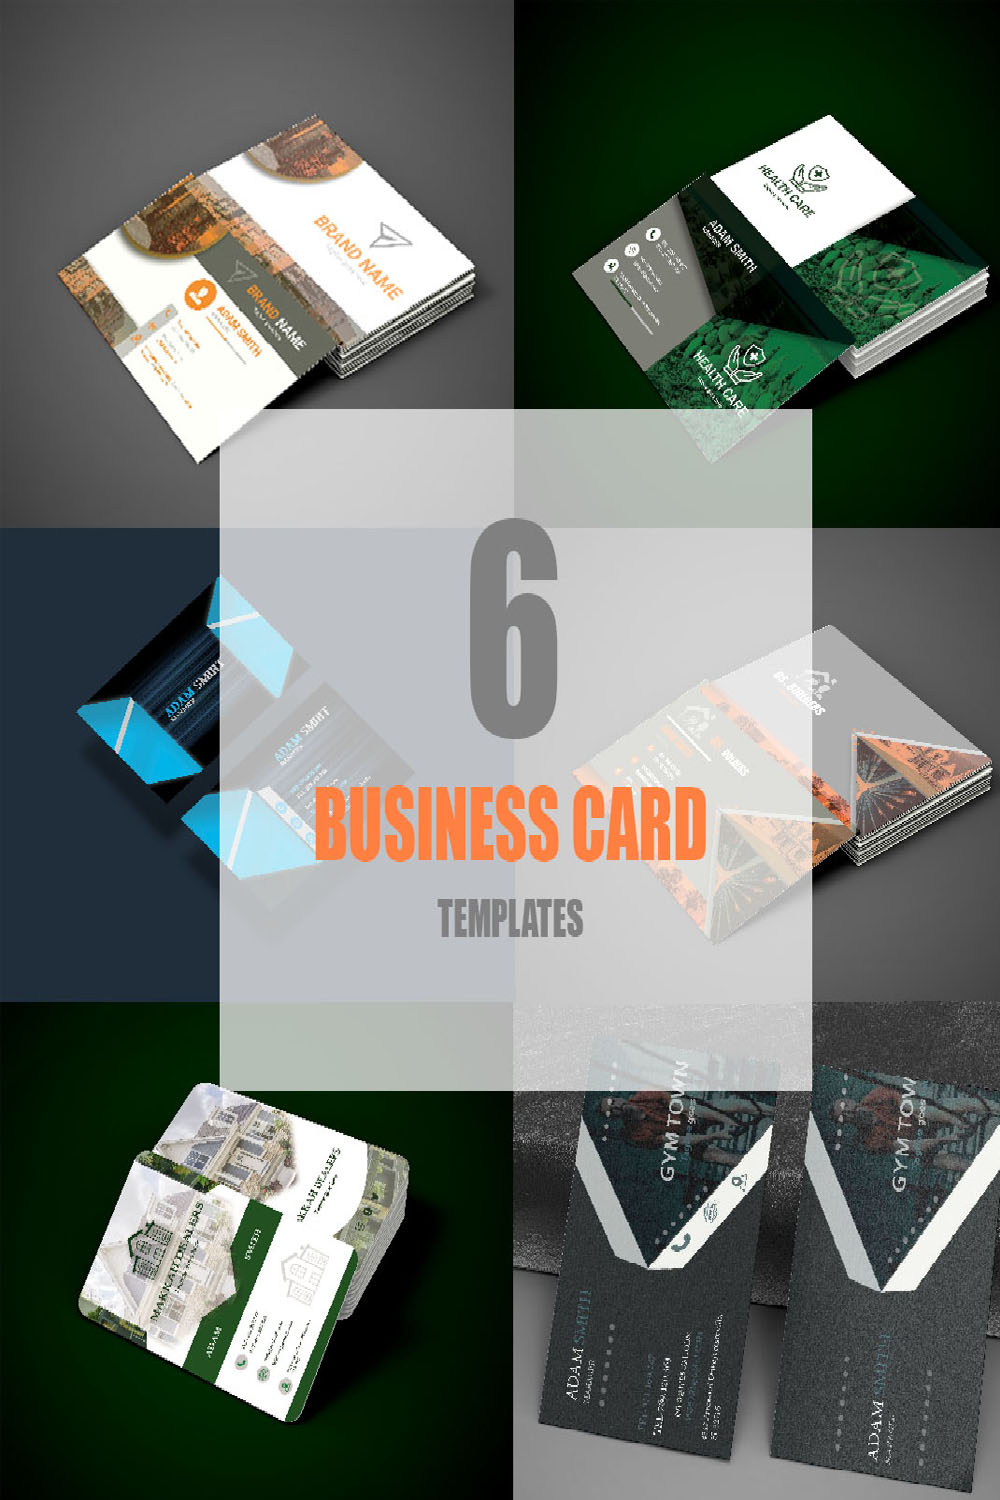 6 Business Card Templates - pinterest image preview.